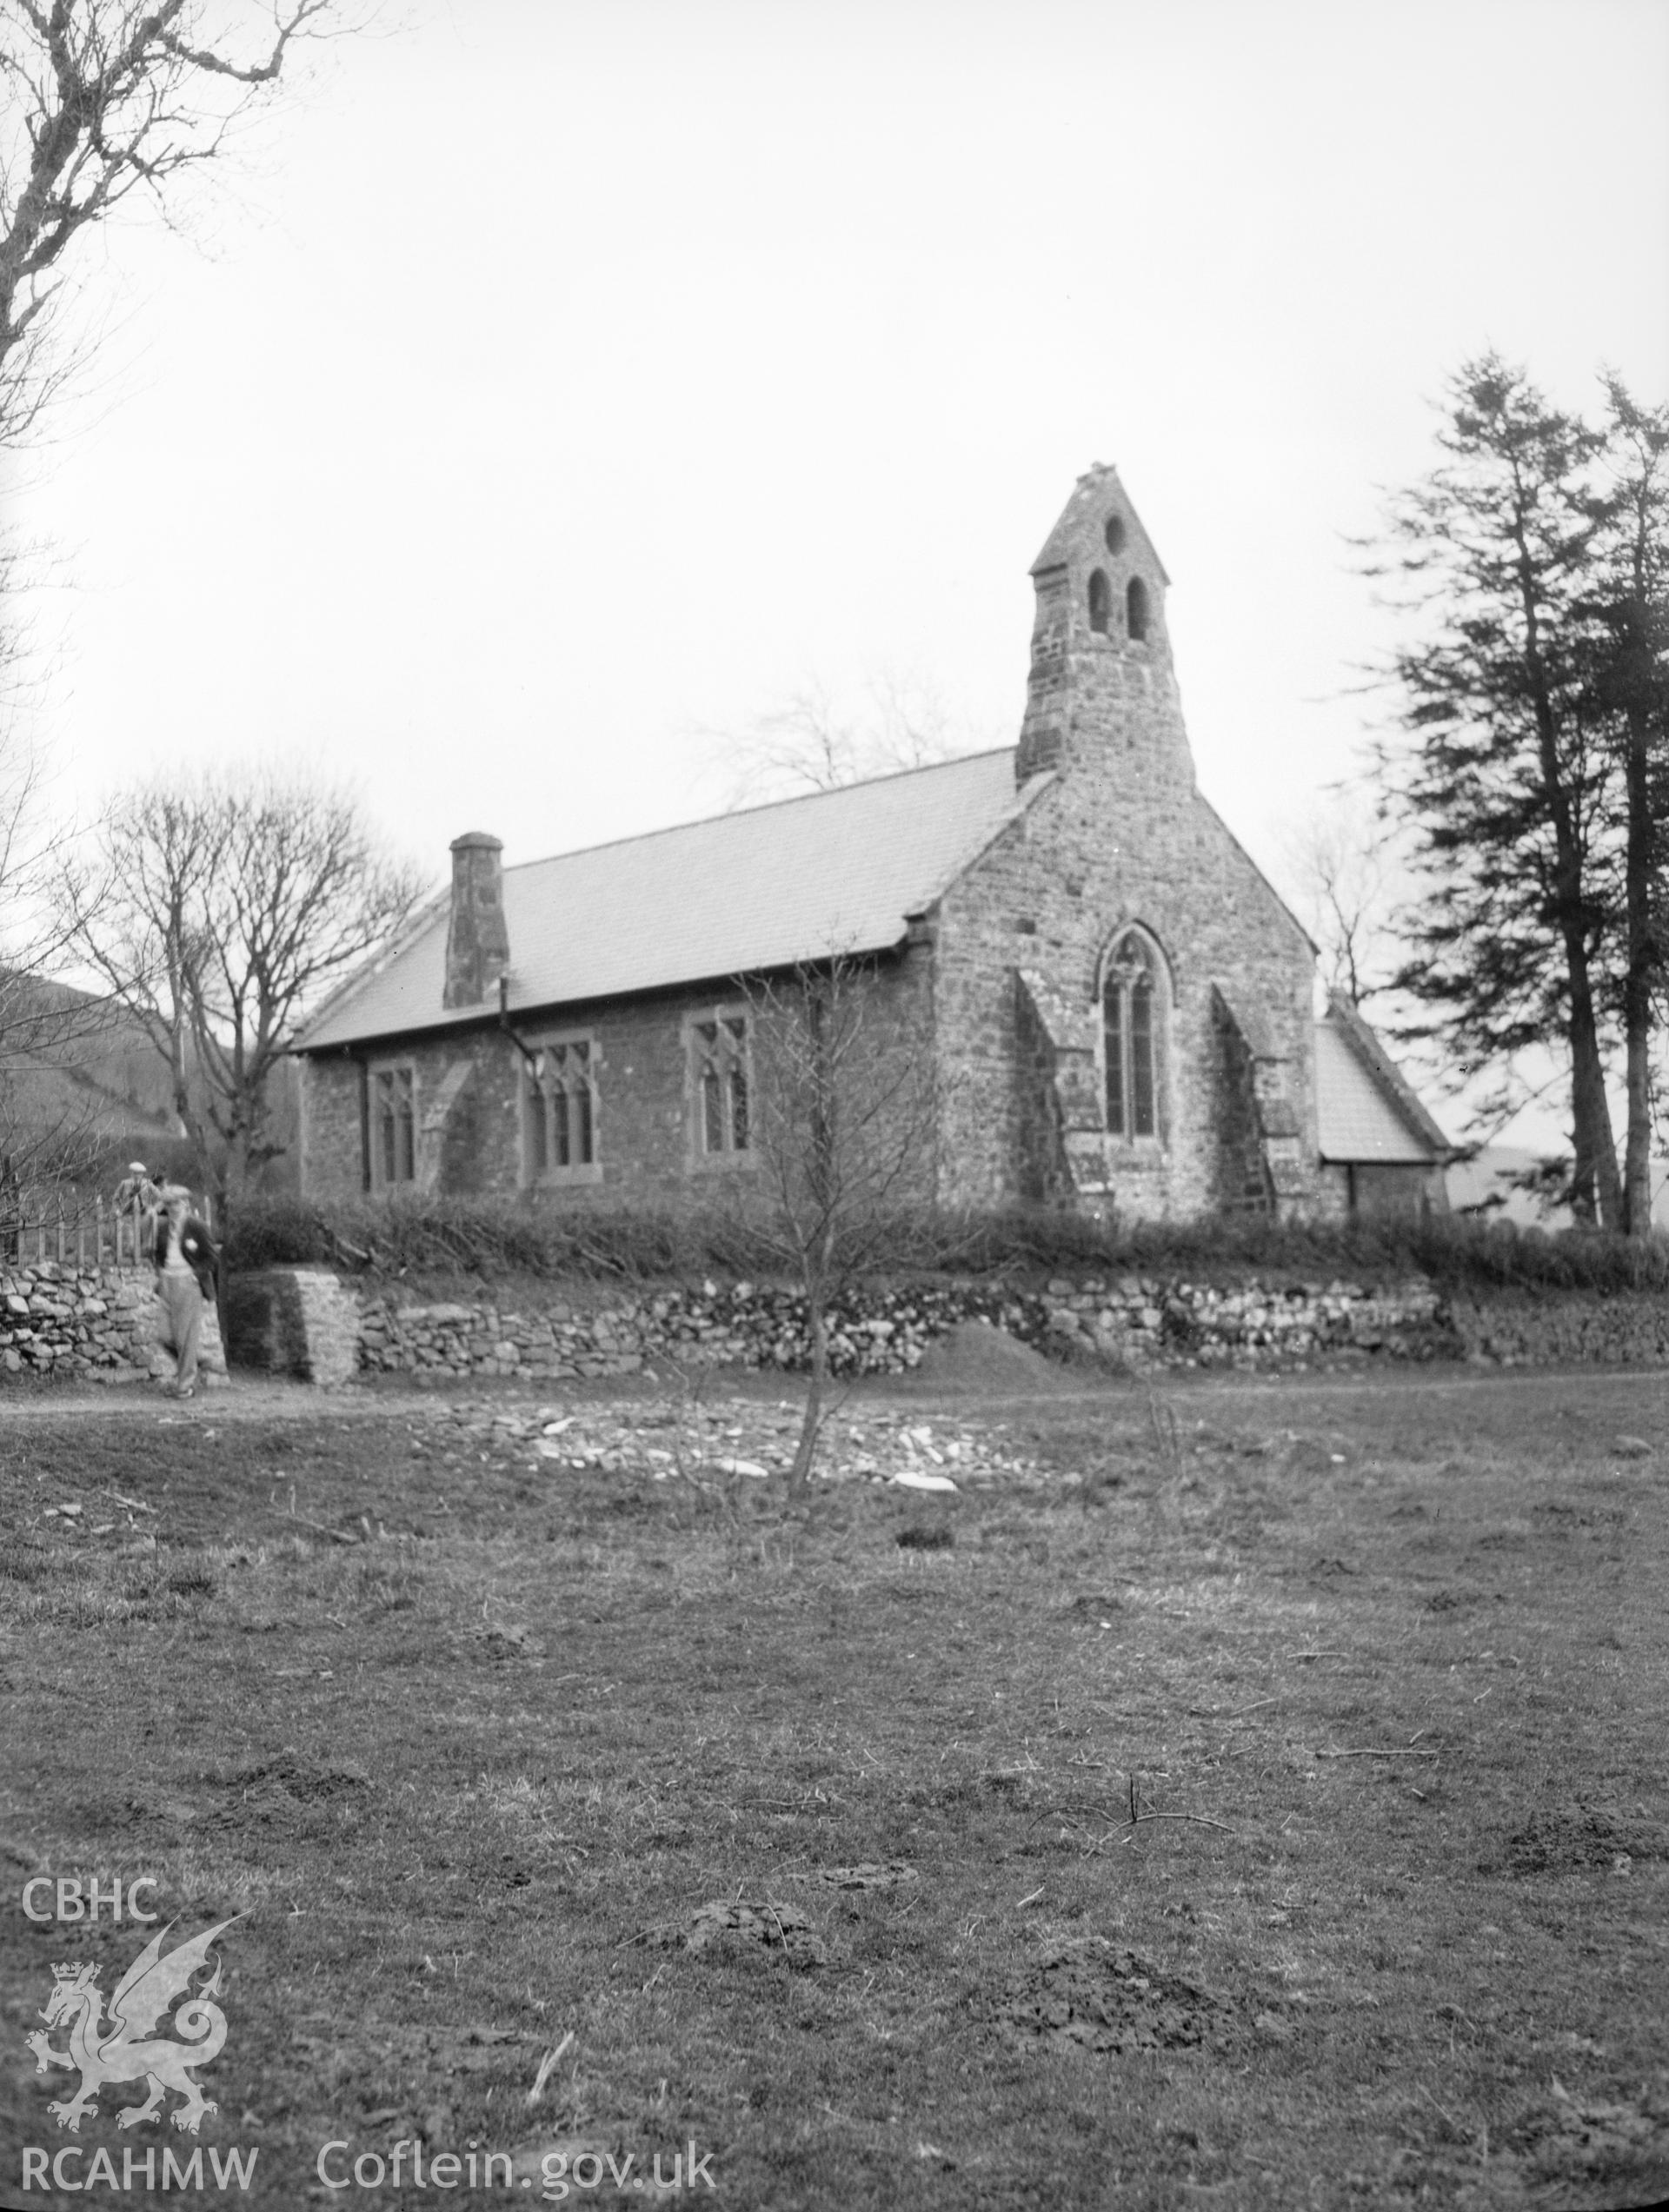 Digital copy of a nitrate negative showing exterior view of St Anno's Church, Llananno, from the south-east. From the National Building Record Postcard Collection.